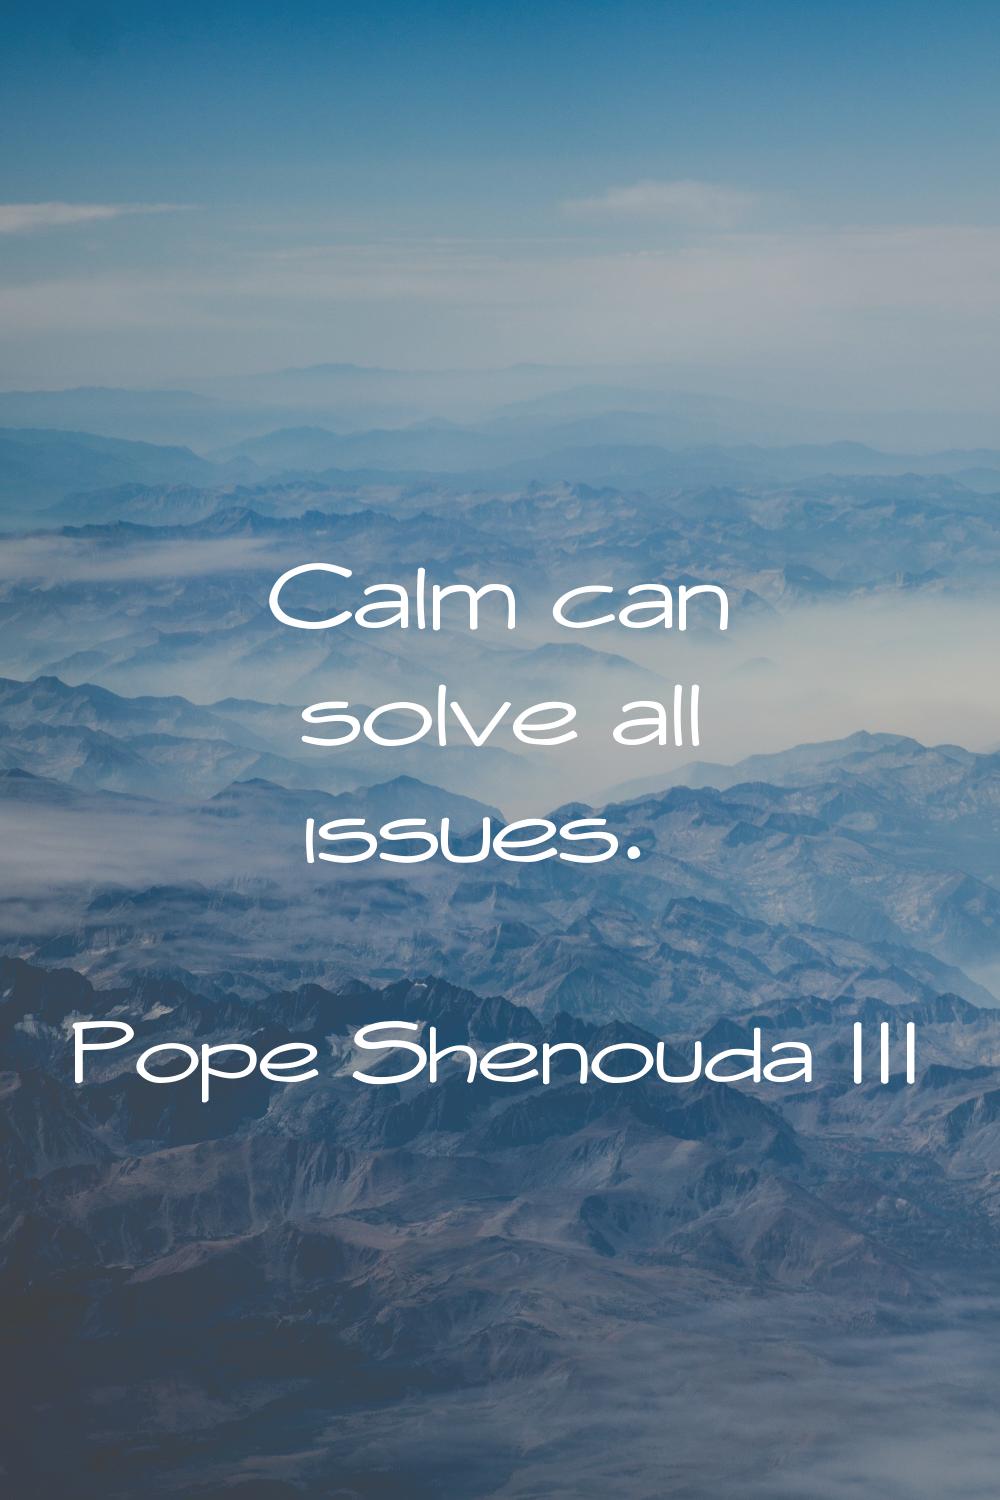 Calm can solve all issues.